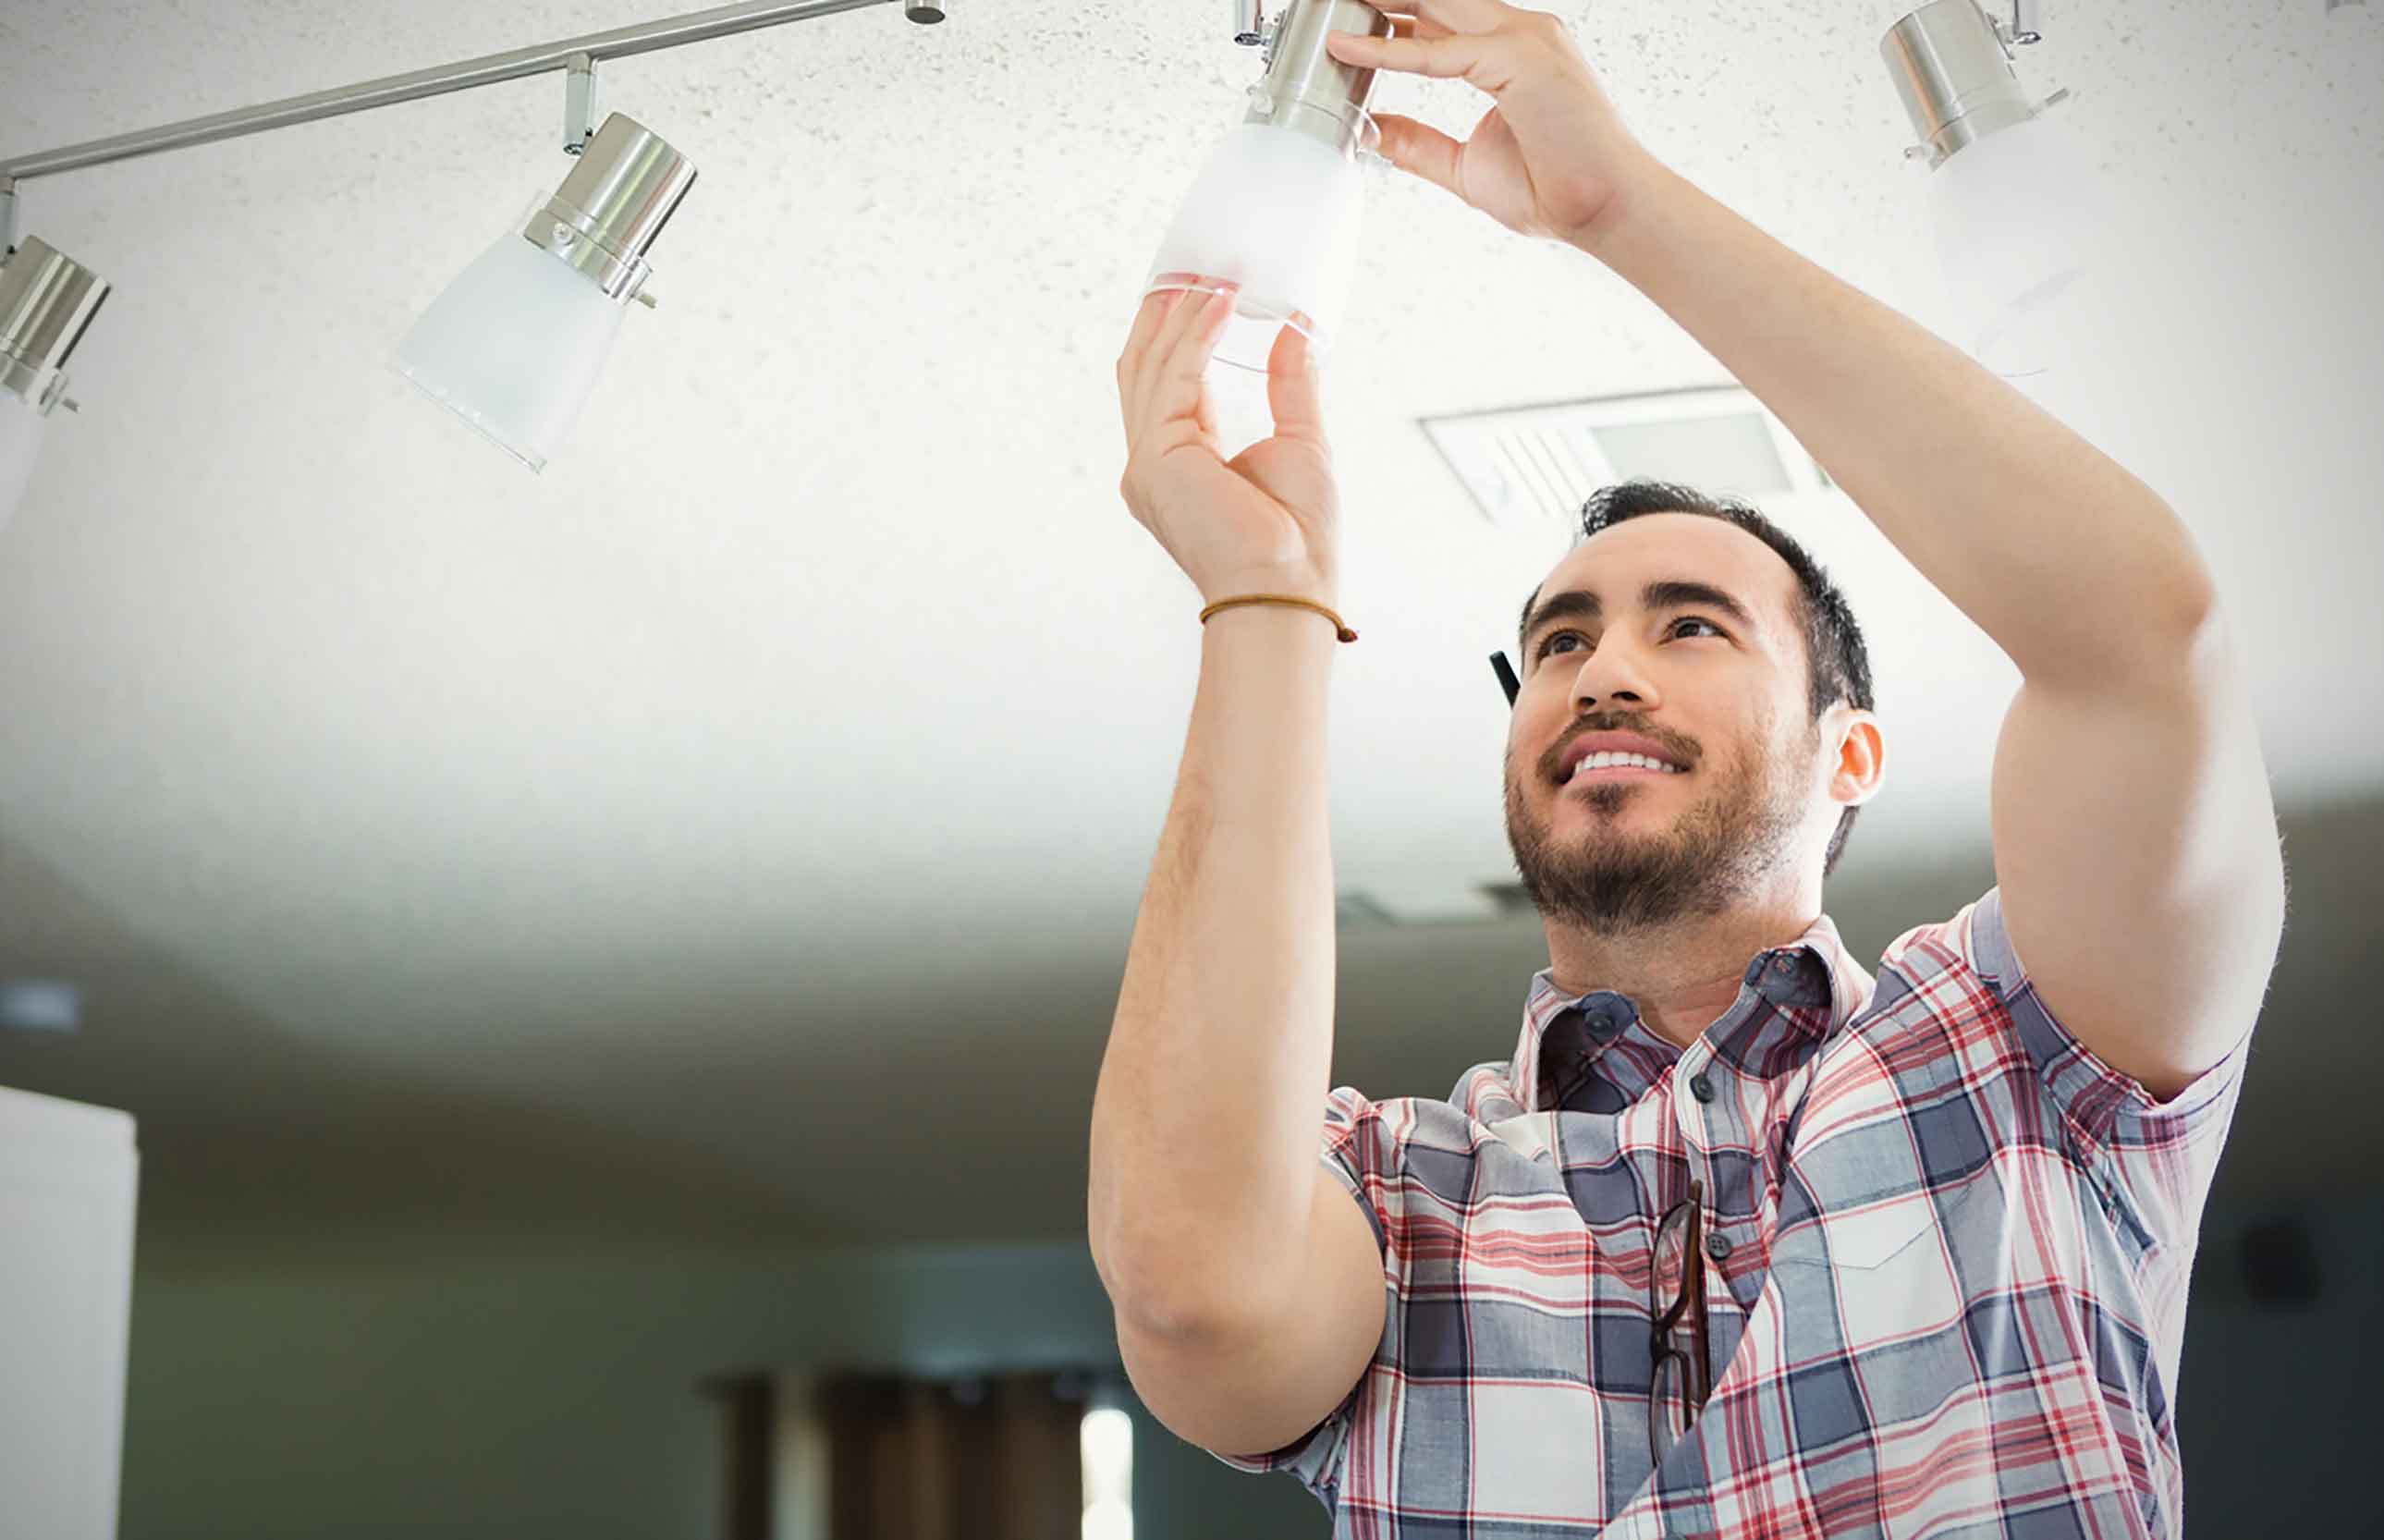 Cooling your home and powering all your favorite gadgets can add up. Here are some ways to squeeze some savings out of your electric bill.